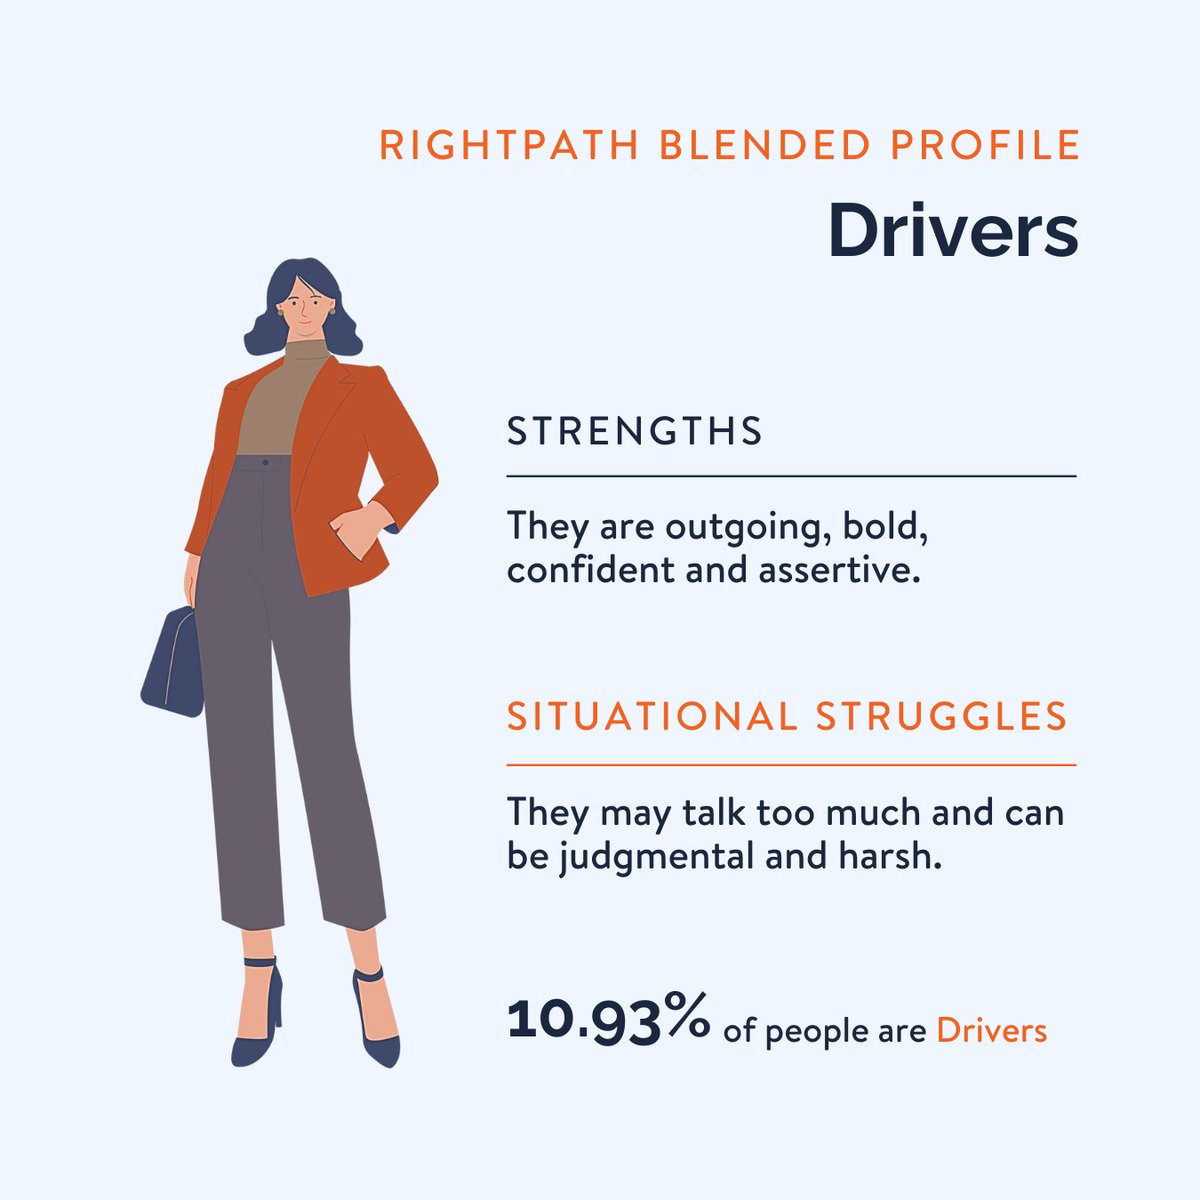 Discover RightPath's Blended Profile: The Drivers ✨

Learn more about your own Blended Profile. rightpath.com/path4-path6

#rightpath #naturalwiring #onlineassessment #workplaceassessment #leader #leadershipdevelopment #corporatetraining #rightpathresources